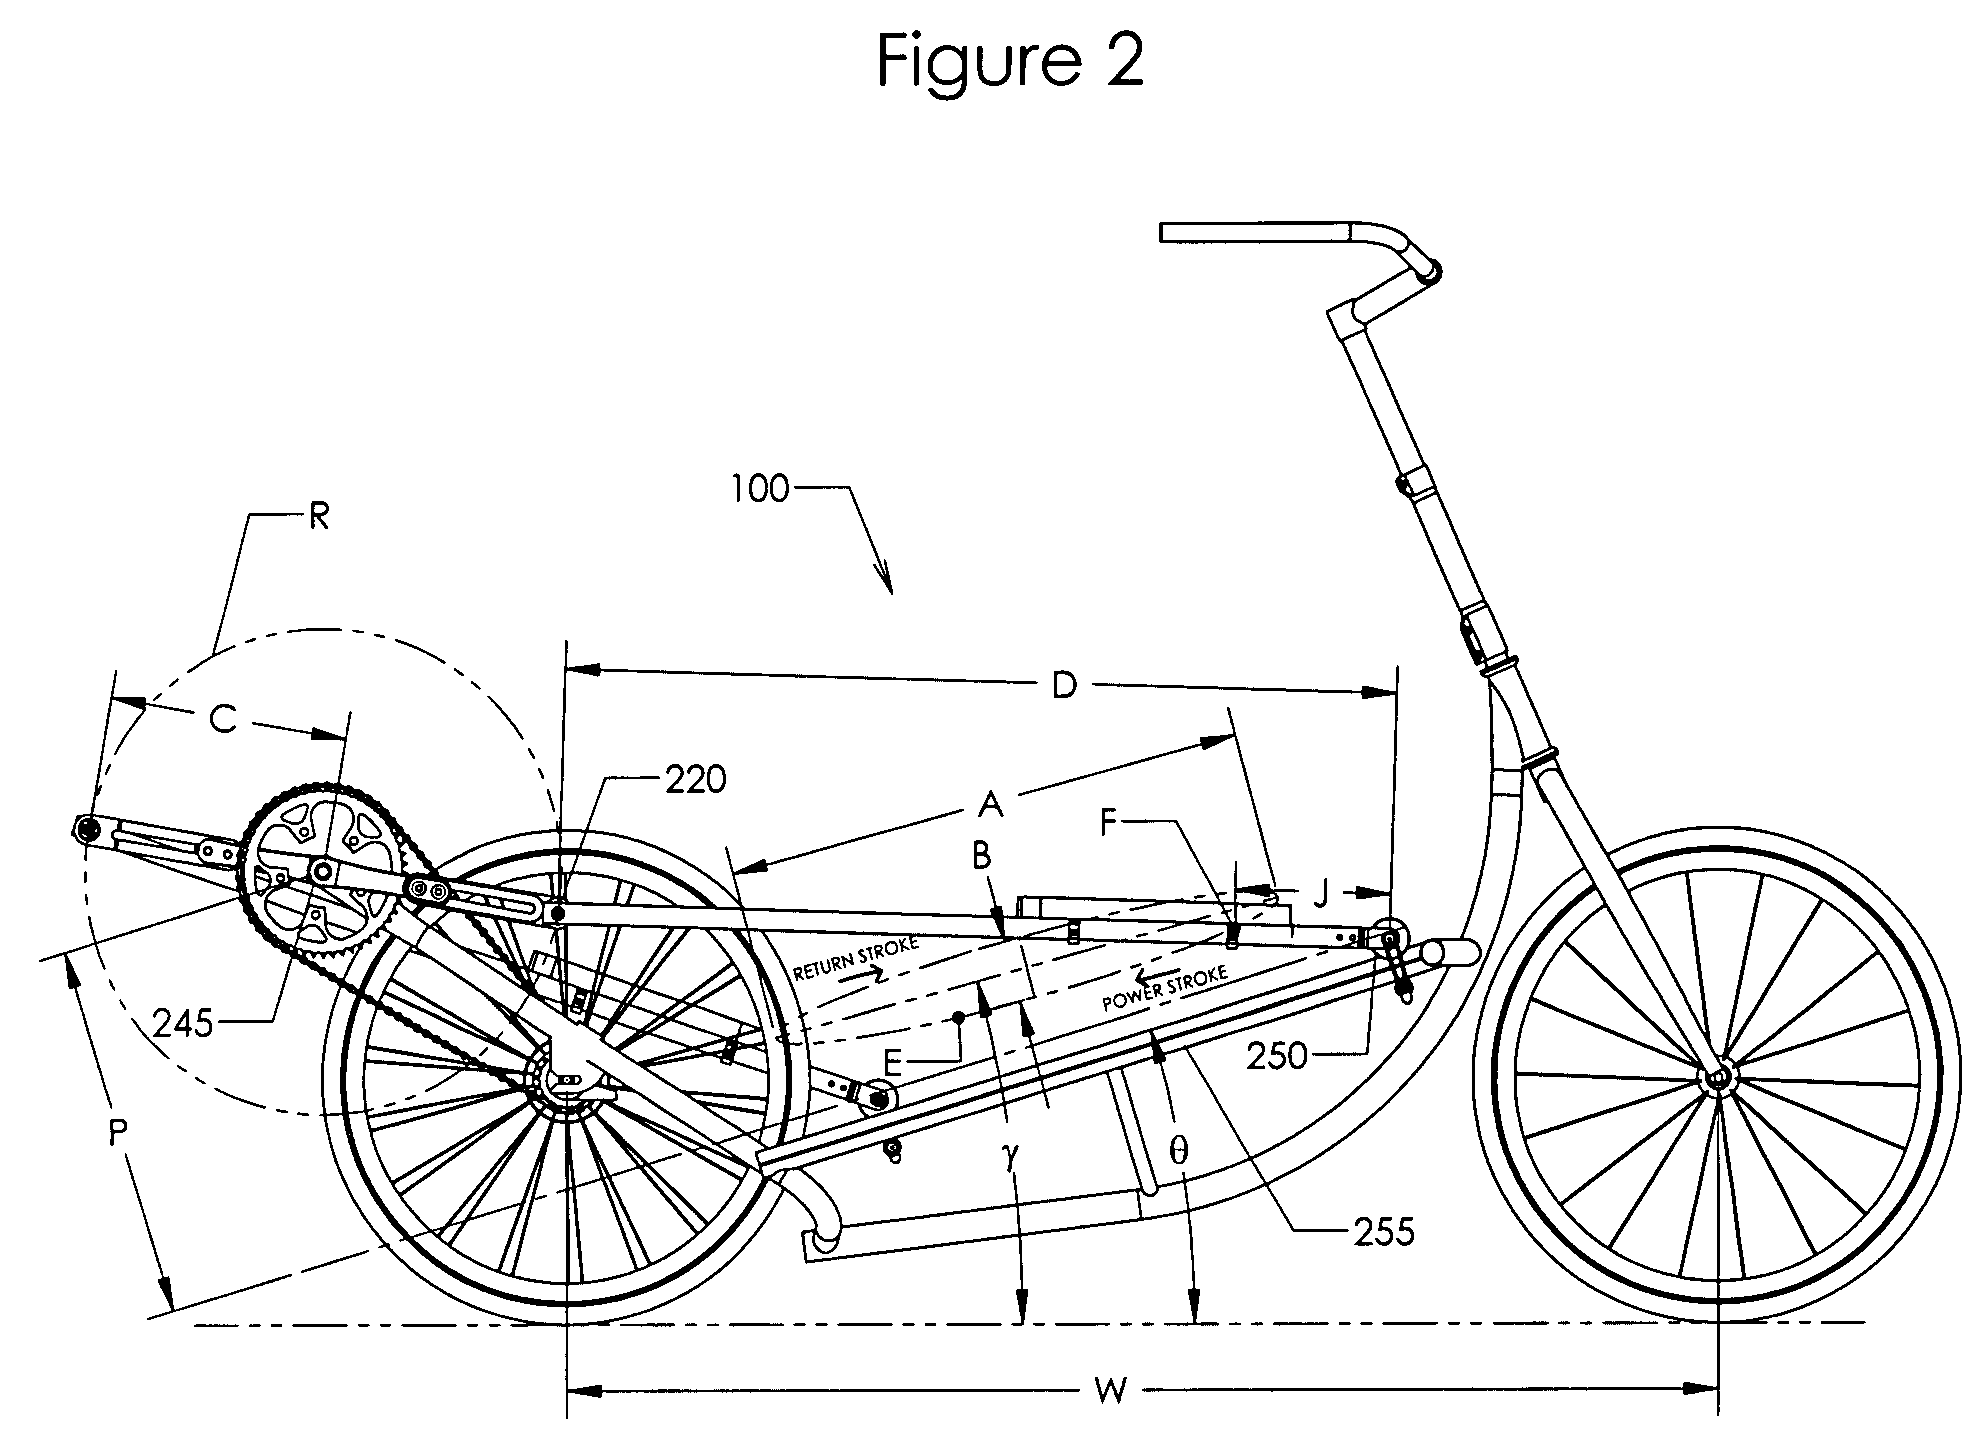 Self-propelled vehicle propelled by an elliptical drive train